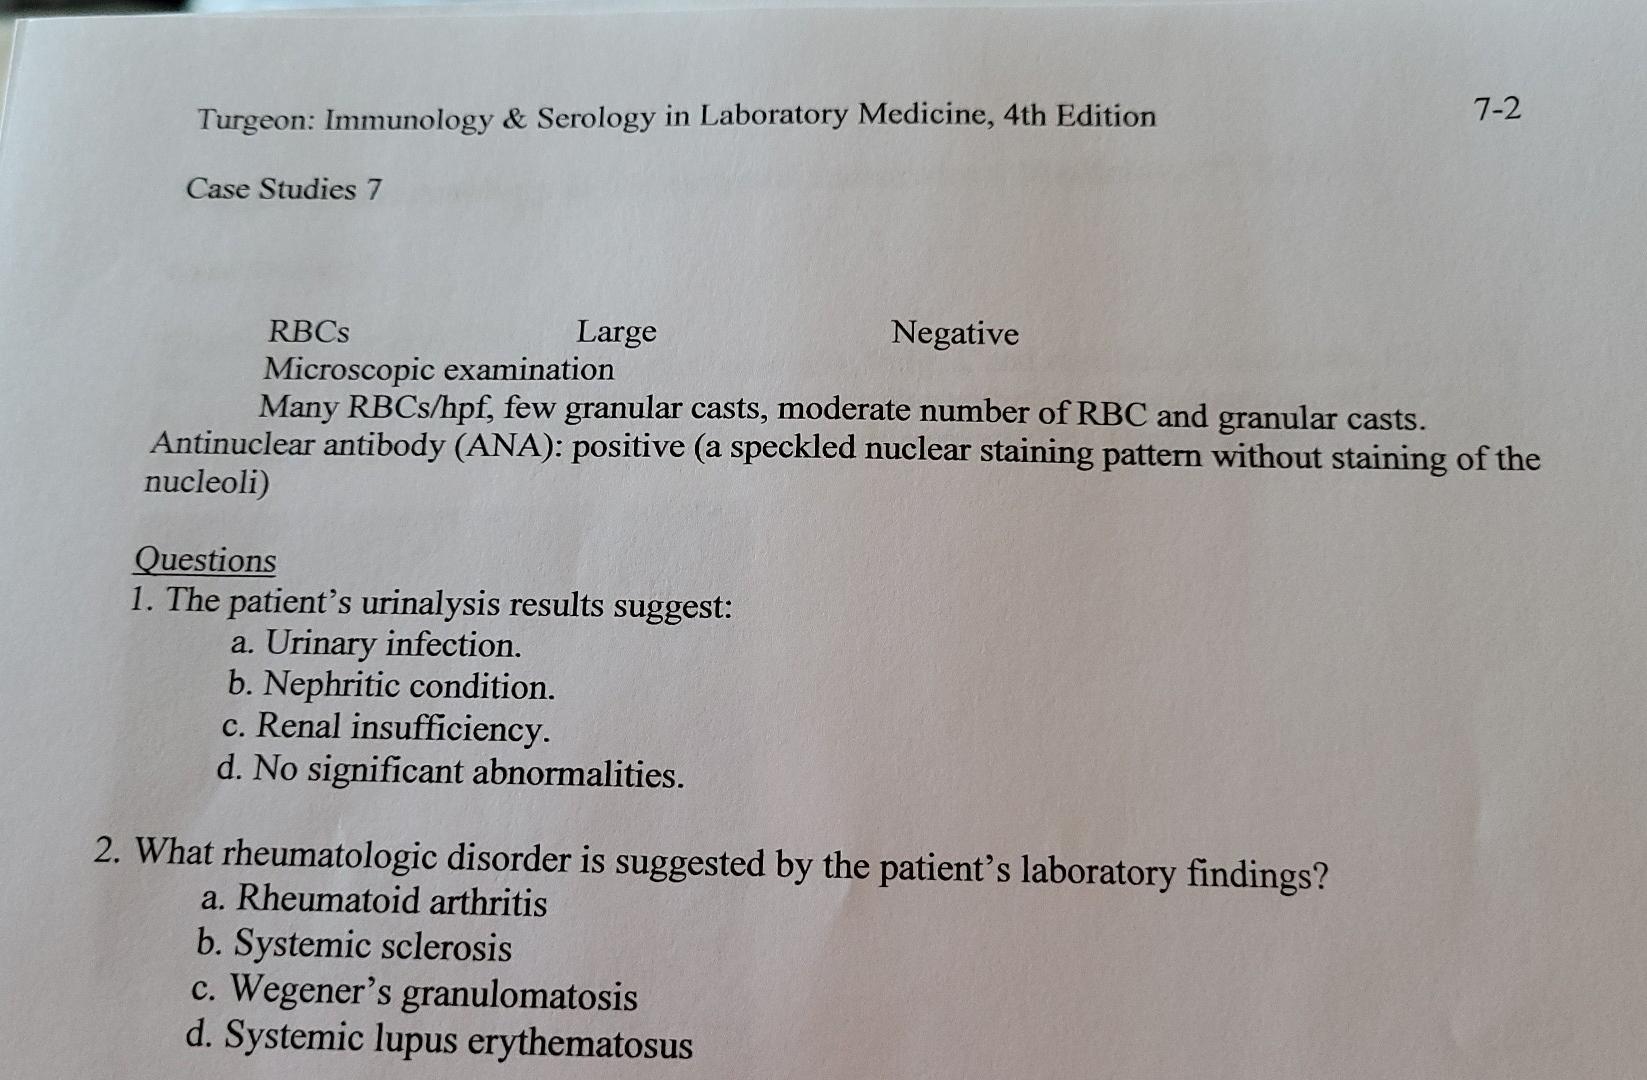 case study for immunology and serology